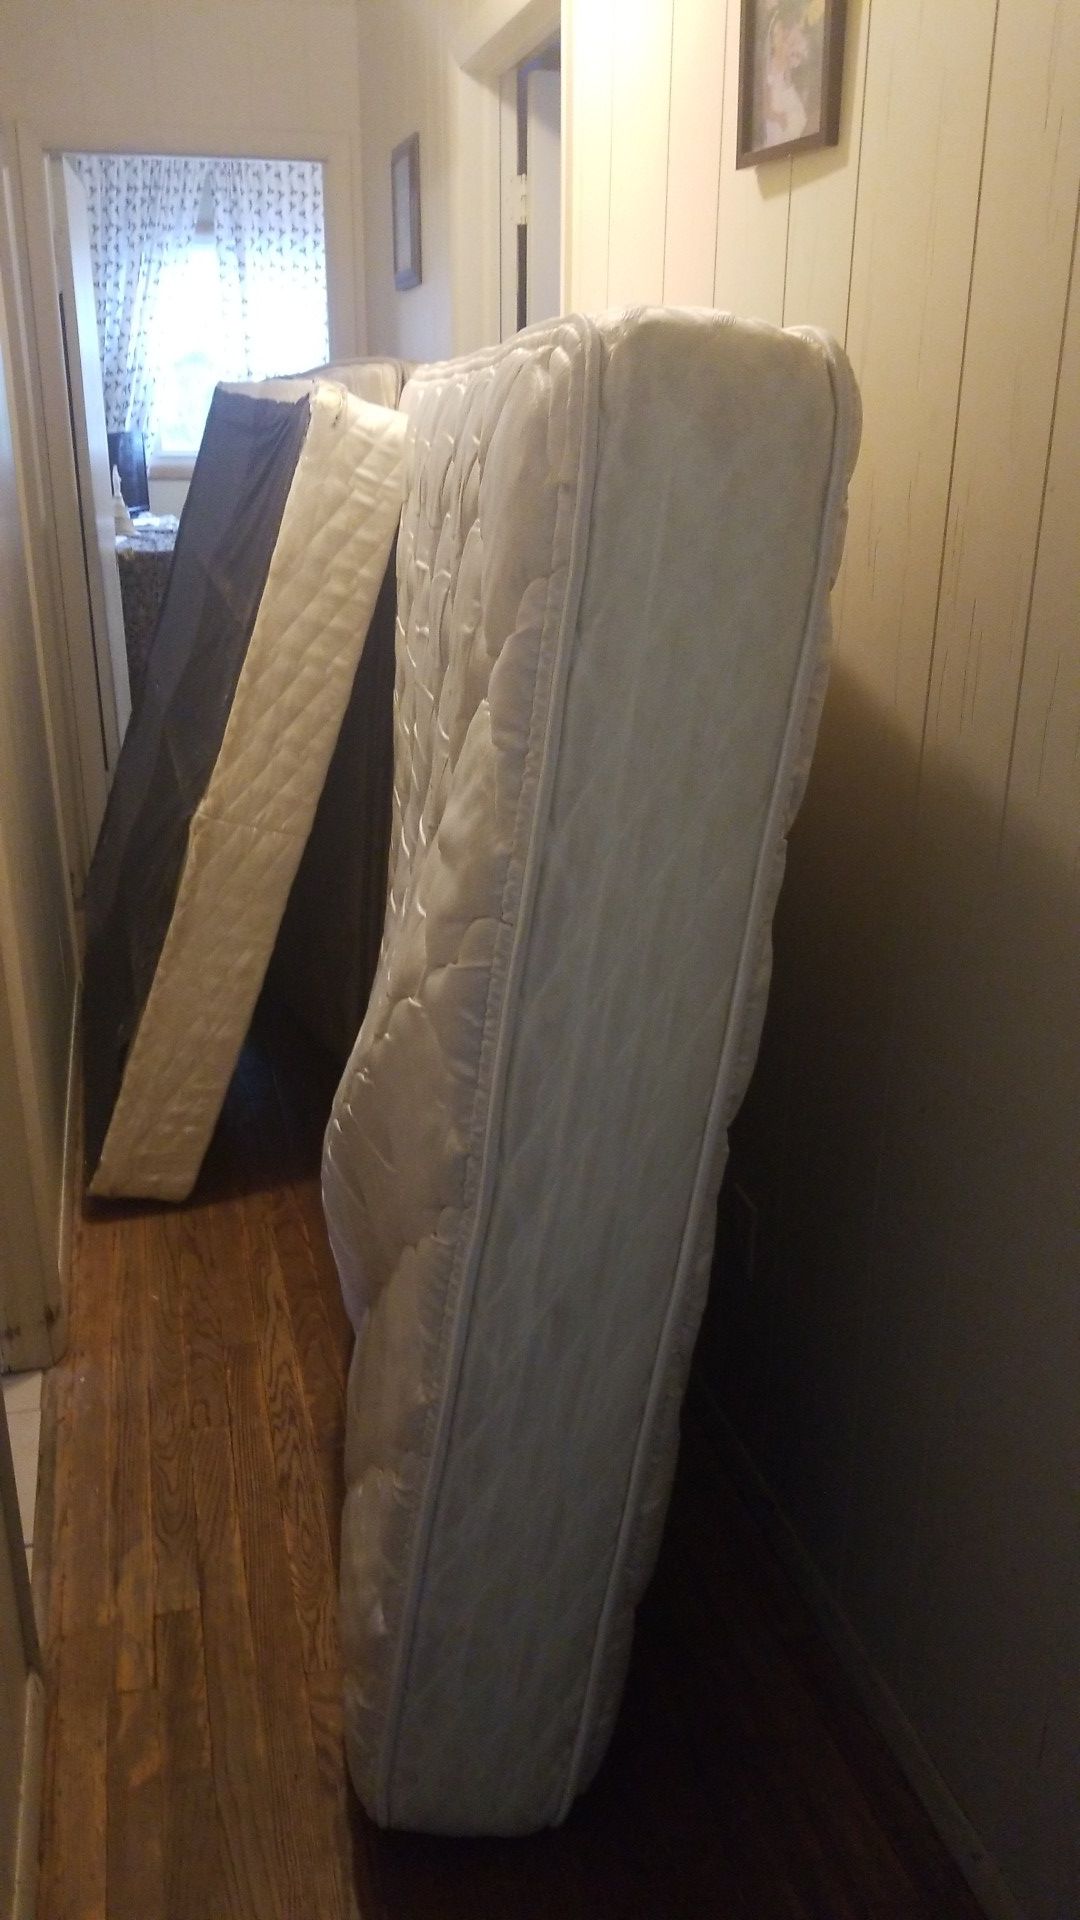 Queen size mattress and 2 box spring